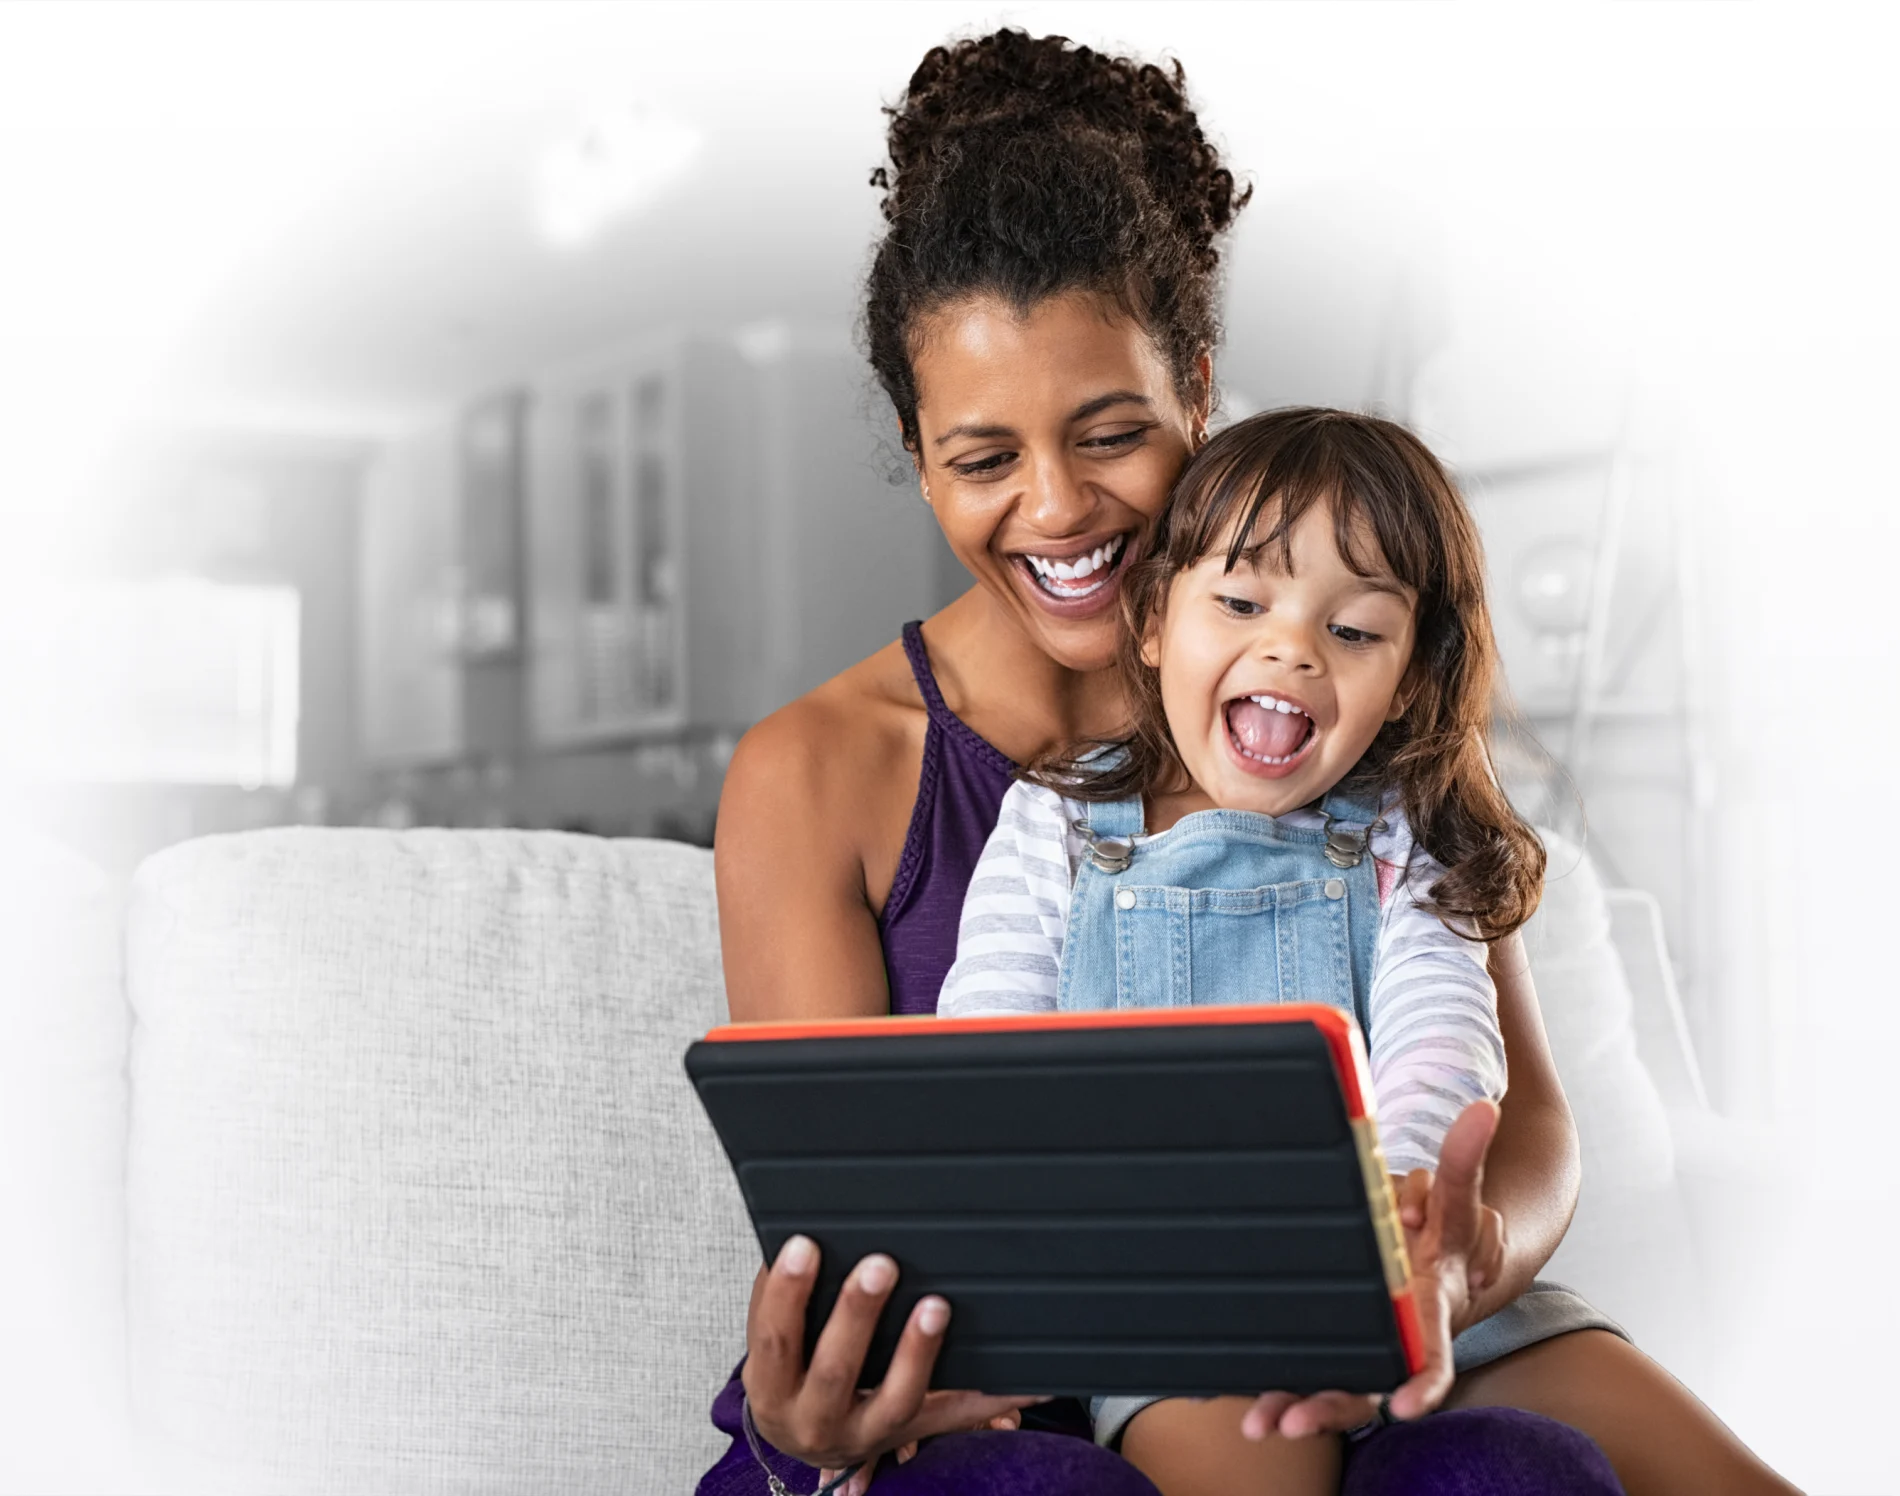 A woman and young child smiling while viewing a tablet